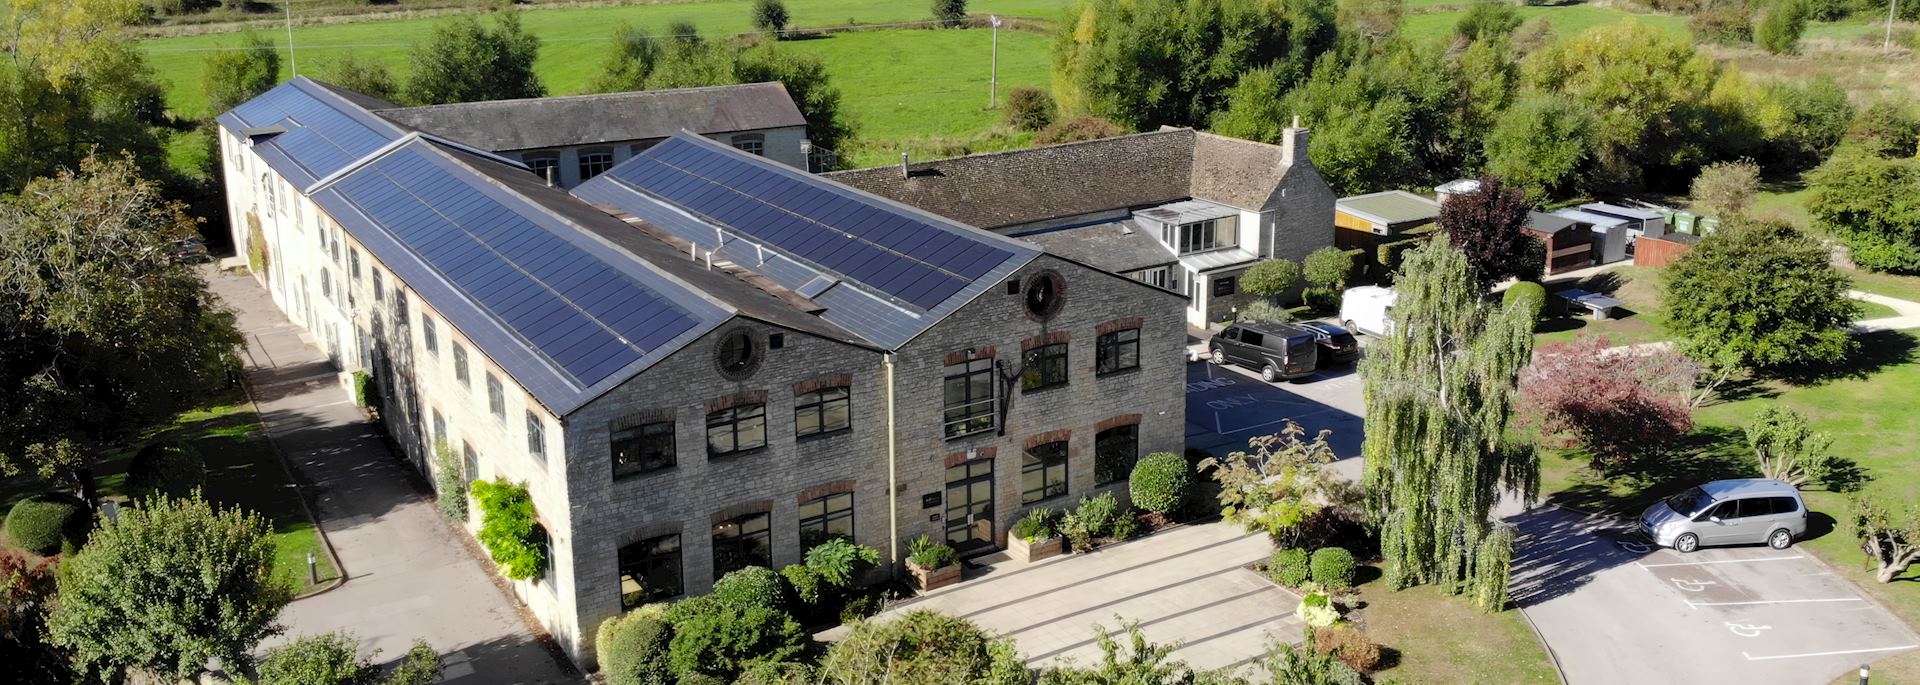 Solar panels at Old Mill offices, Witney